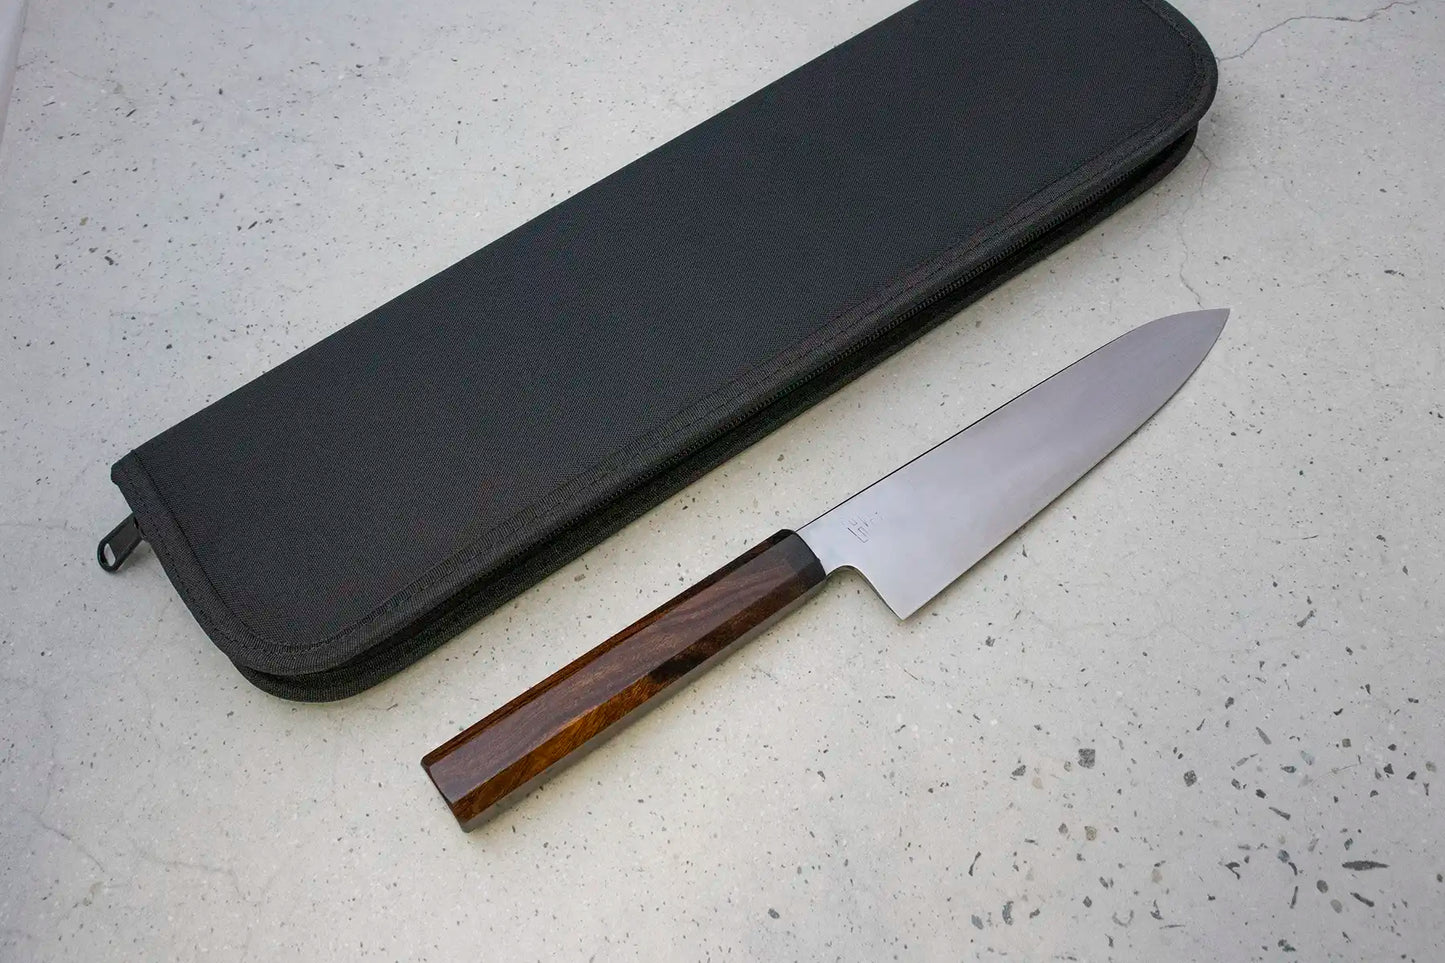 Hunter Valley Blades Gyuto (Chefs Knife) 170mm, Arizona Ironwood and African Blackwoodby Tansu Knives